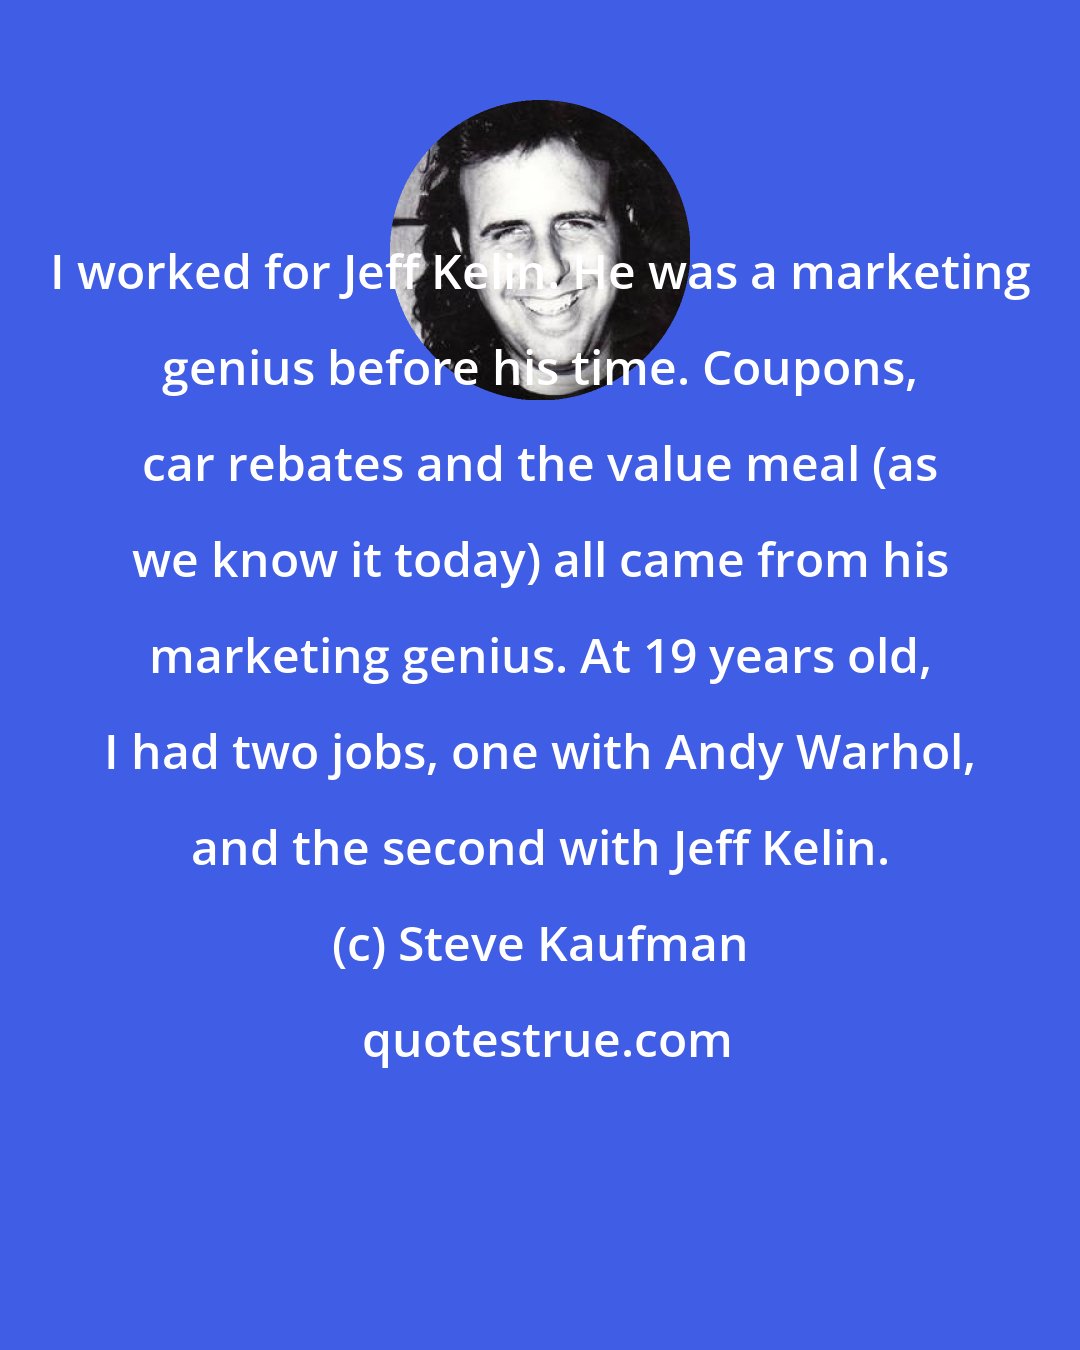 Steve Kaufman: I worked for Jeff Kelin. He was a marketing genius before his time. Coupons, car rebates and the value meal (as we know it today) all came from his marketing genius. At 19 years old, I had two jobs, one with Andy Warhol, and the second with Jeff Kelin.